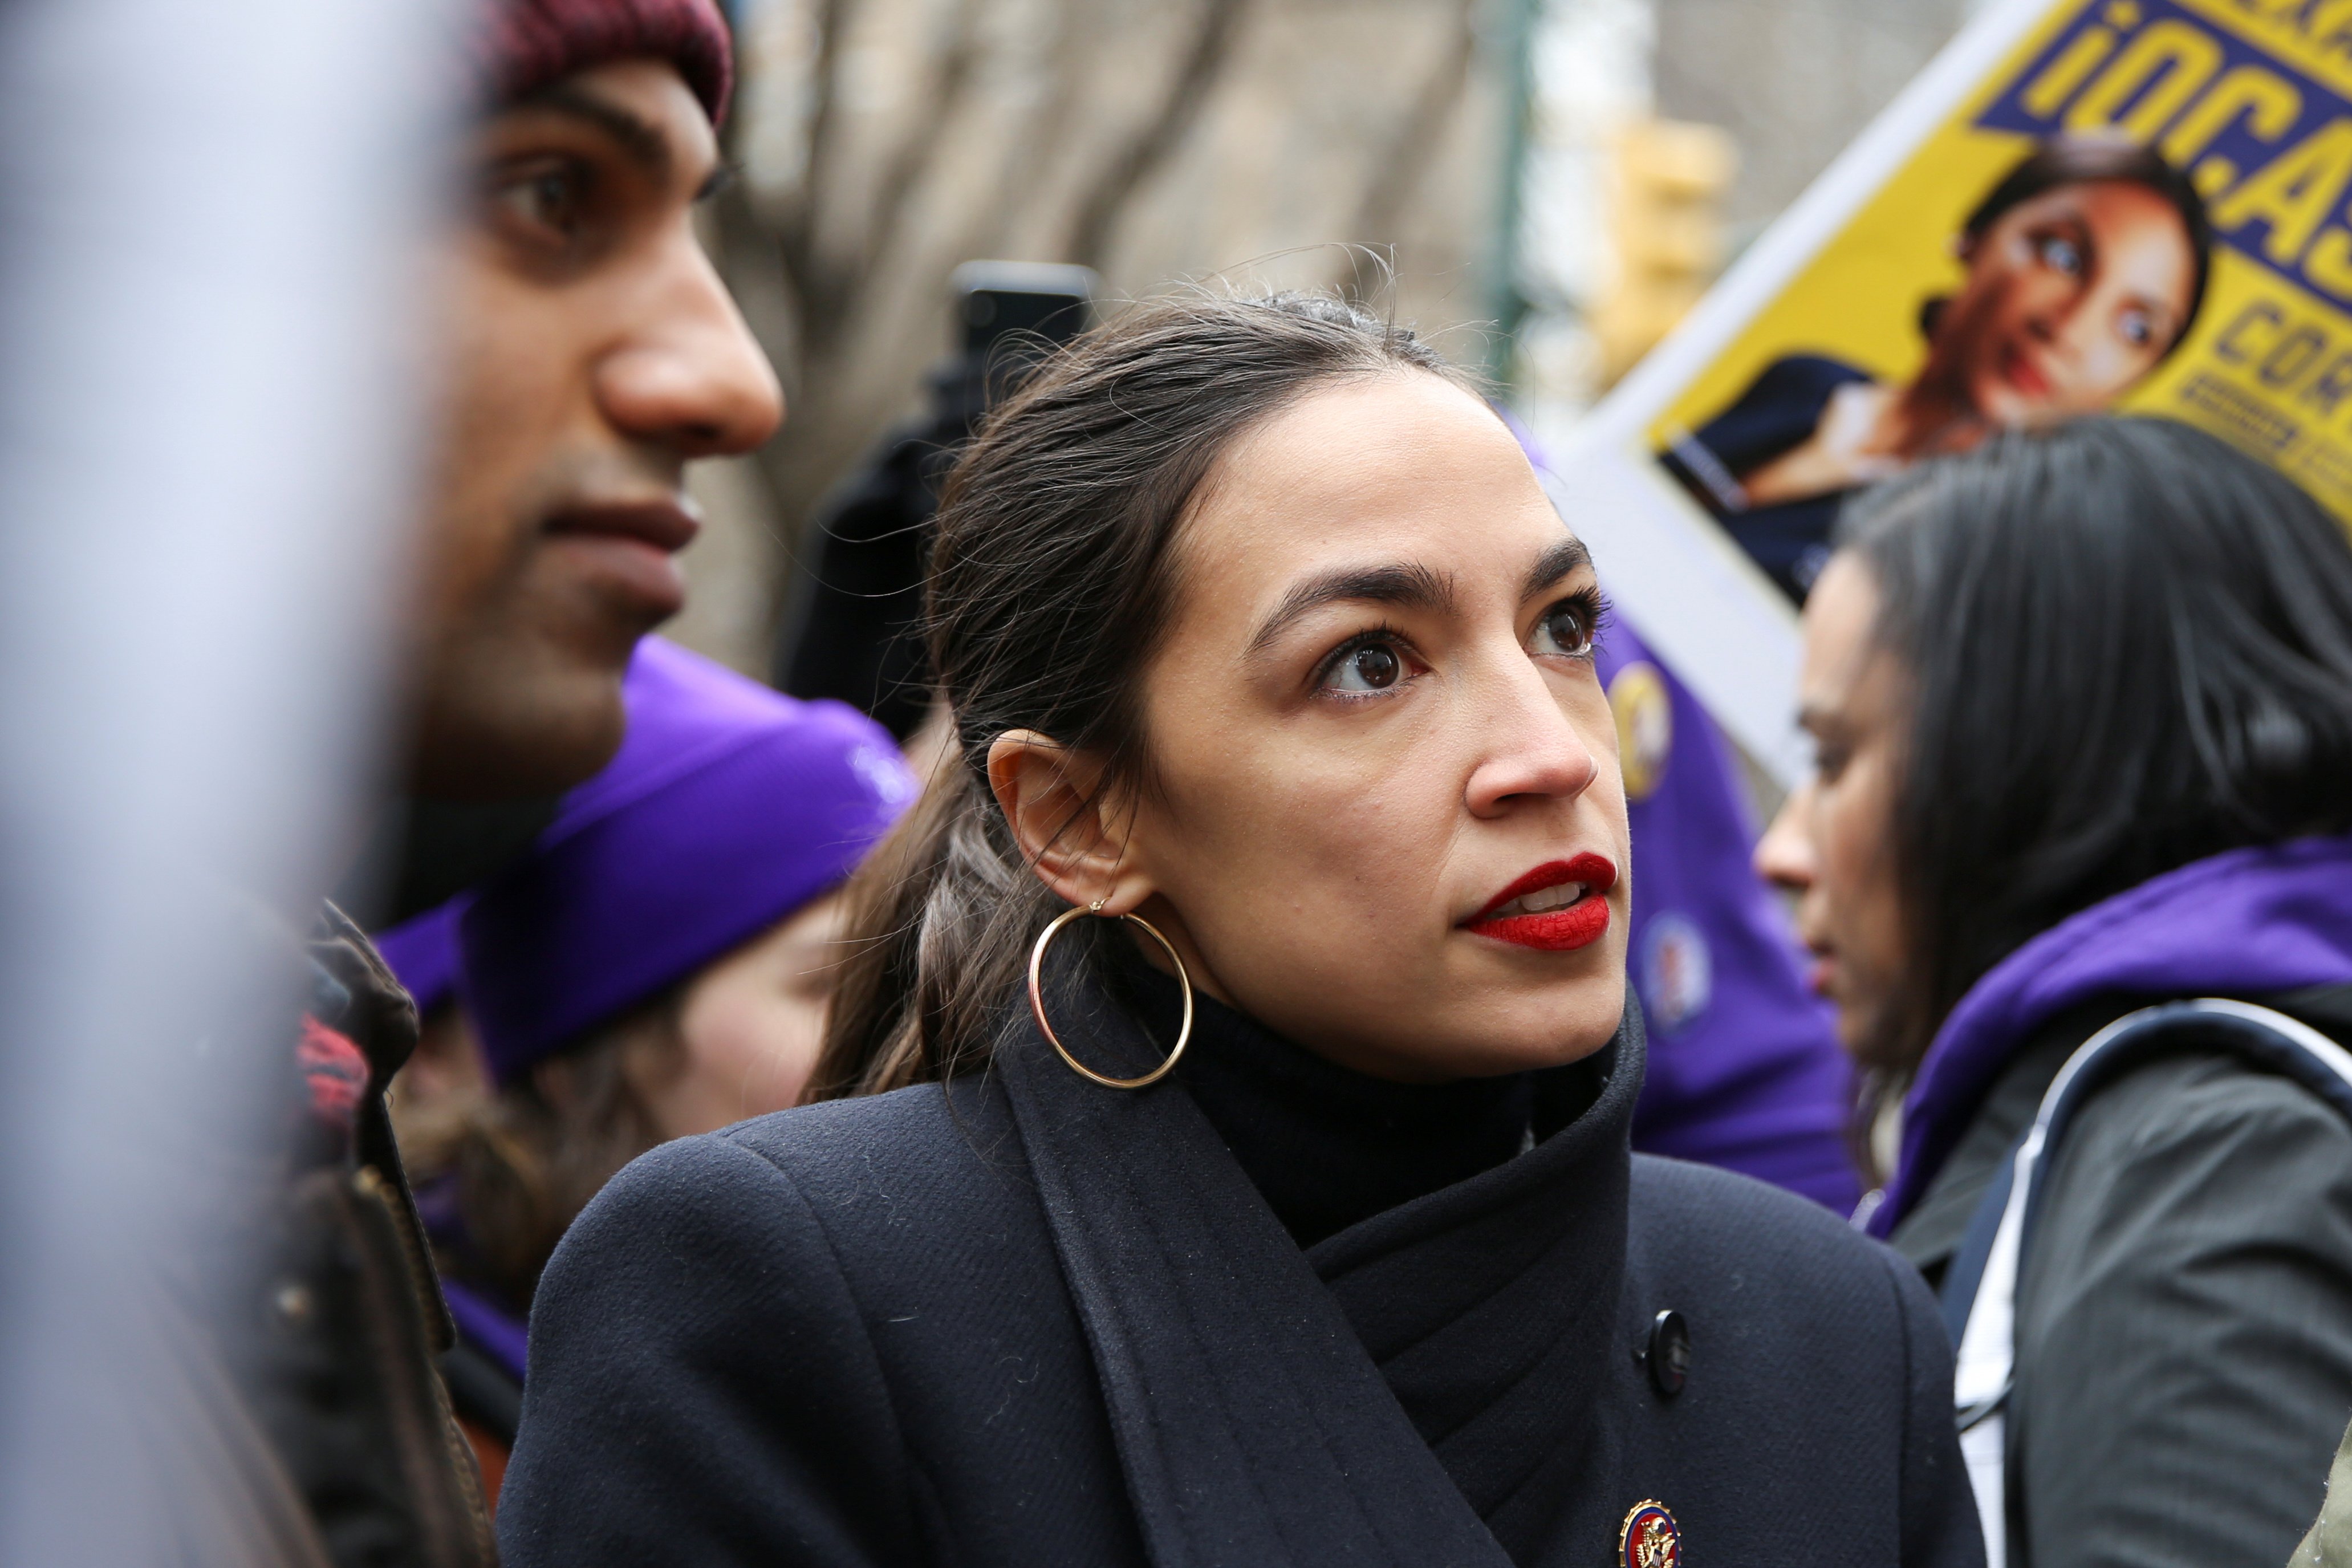 Rep. Alexandria Ocasio-Cortez speaks during a march organised by the Women's March Alliance in the Manhattan borough of New York City